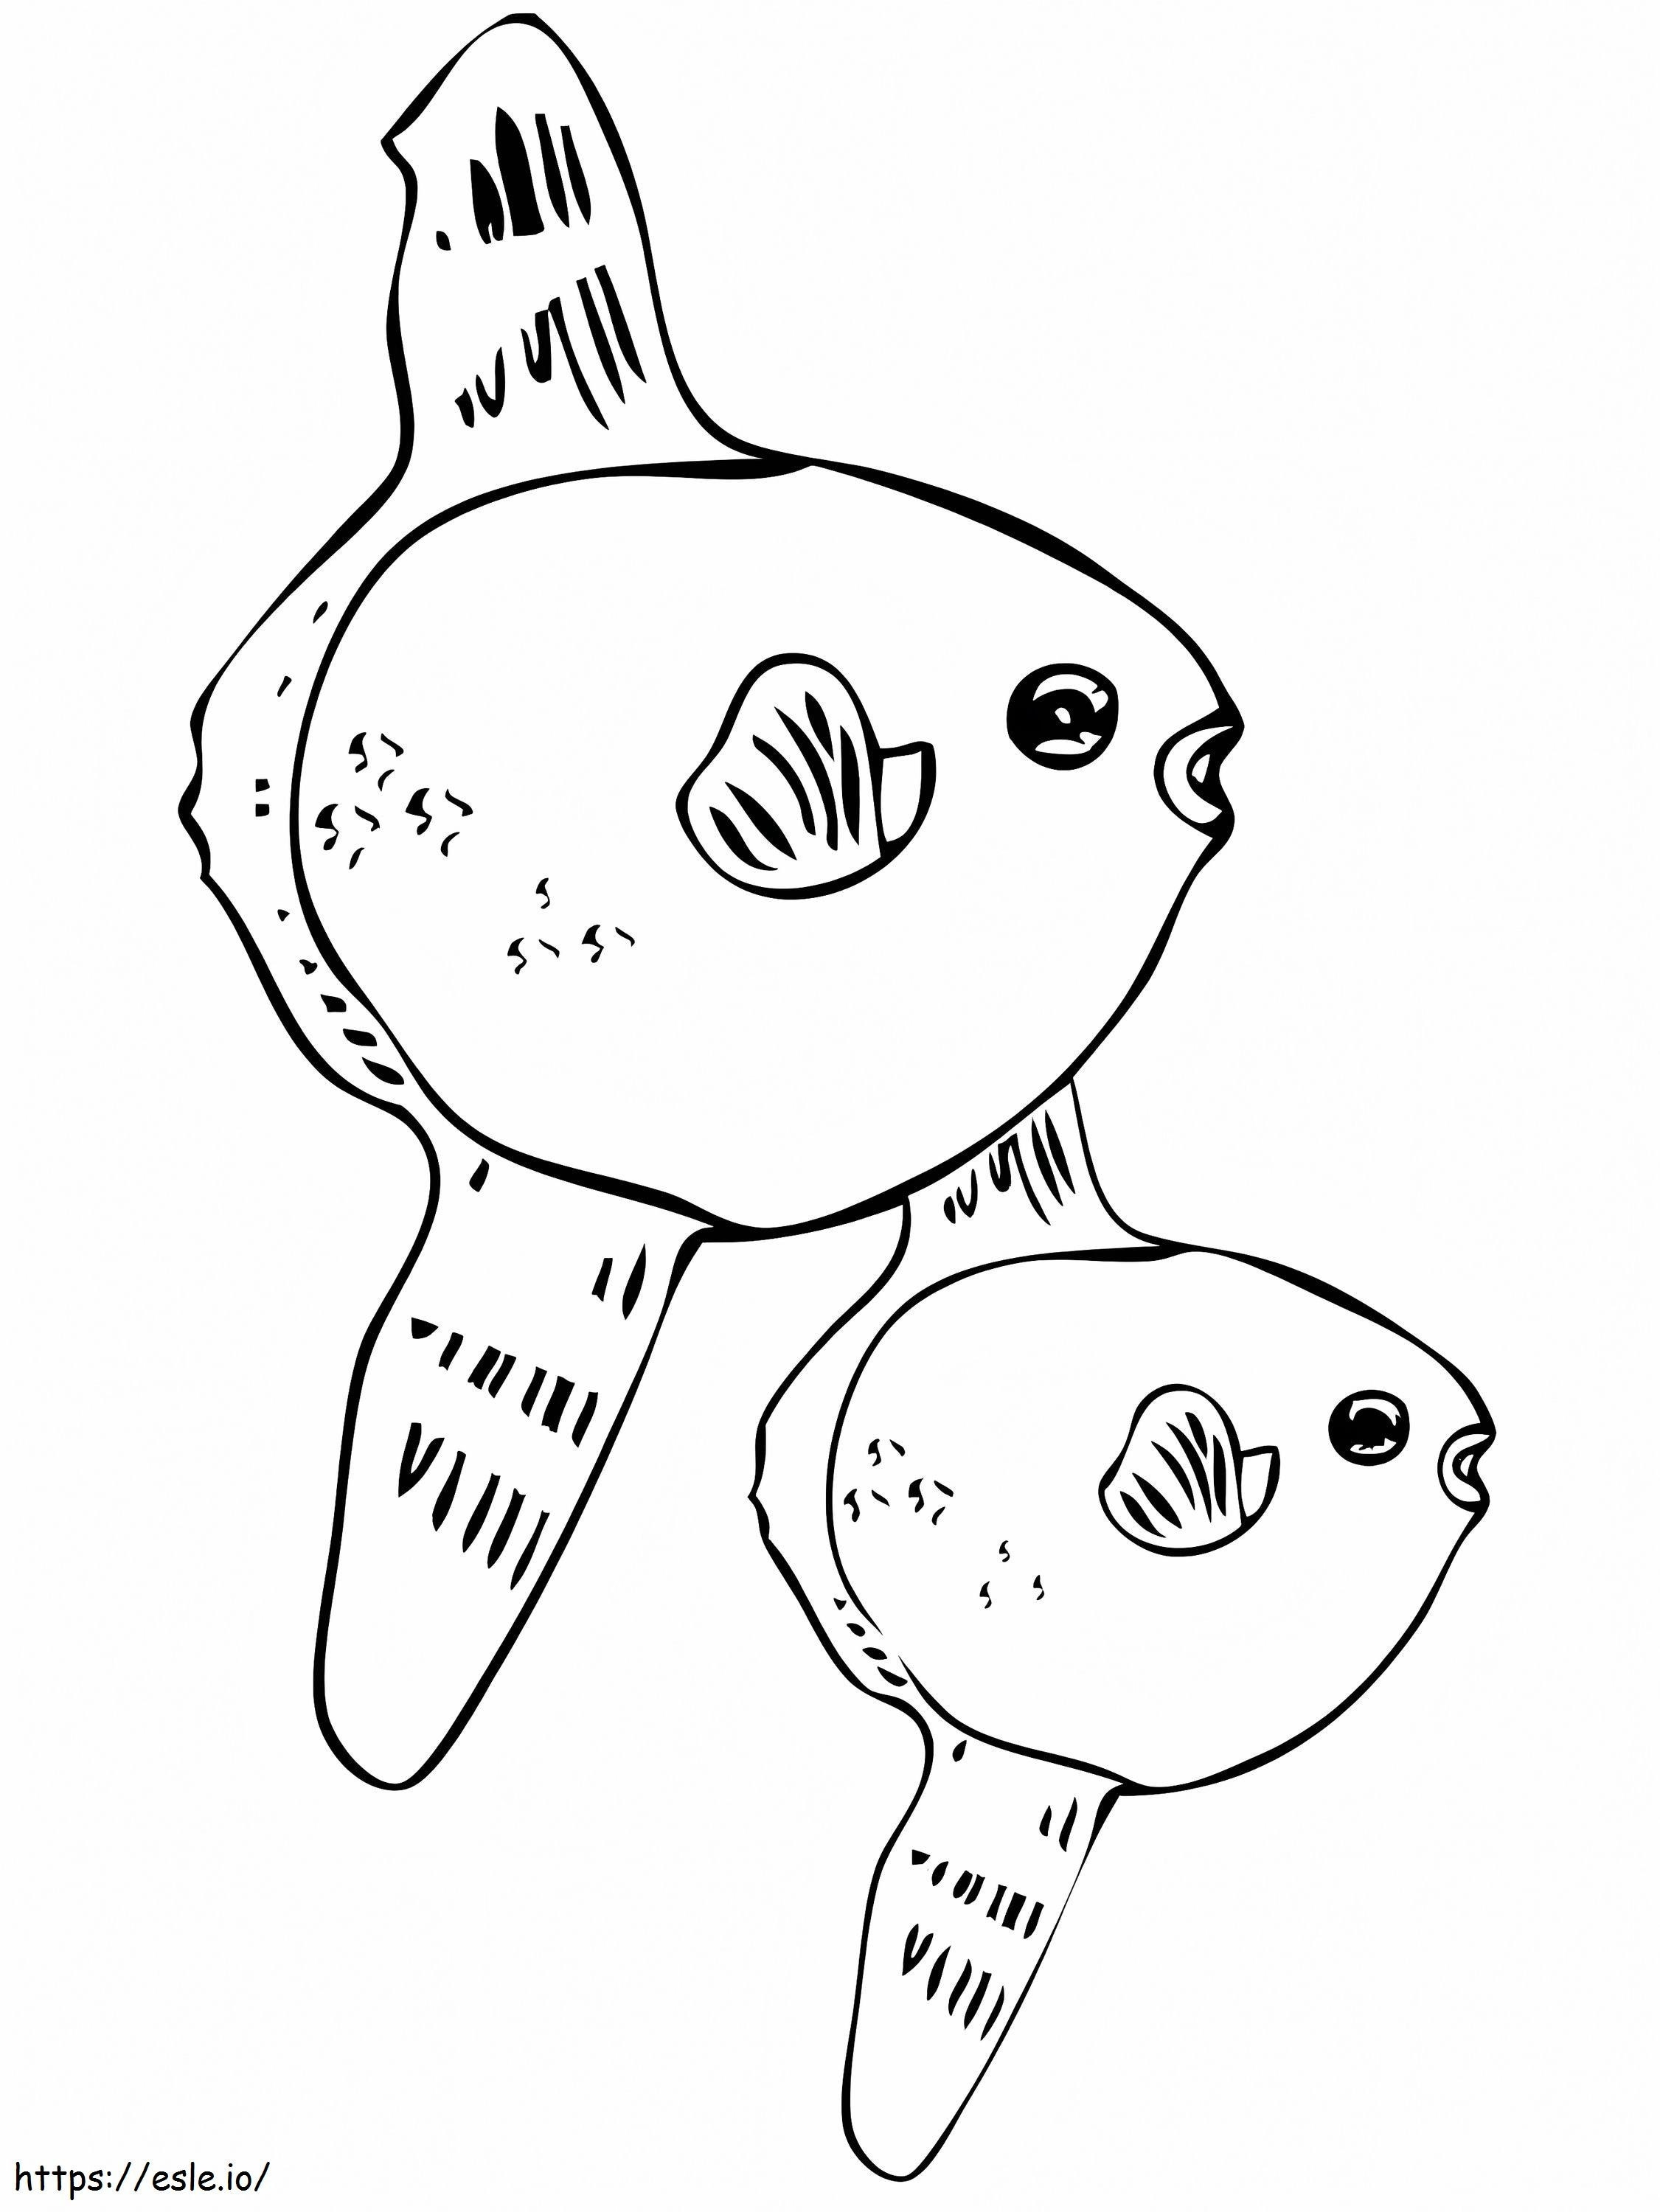 Sunfishes coloring page